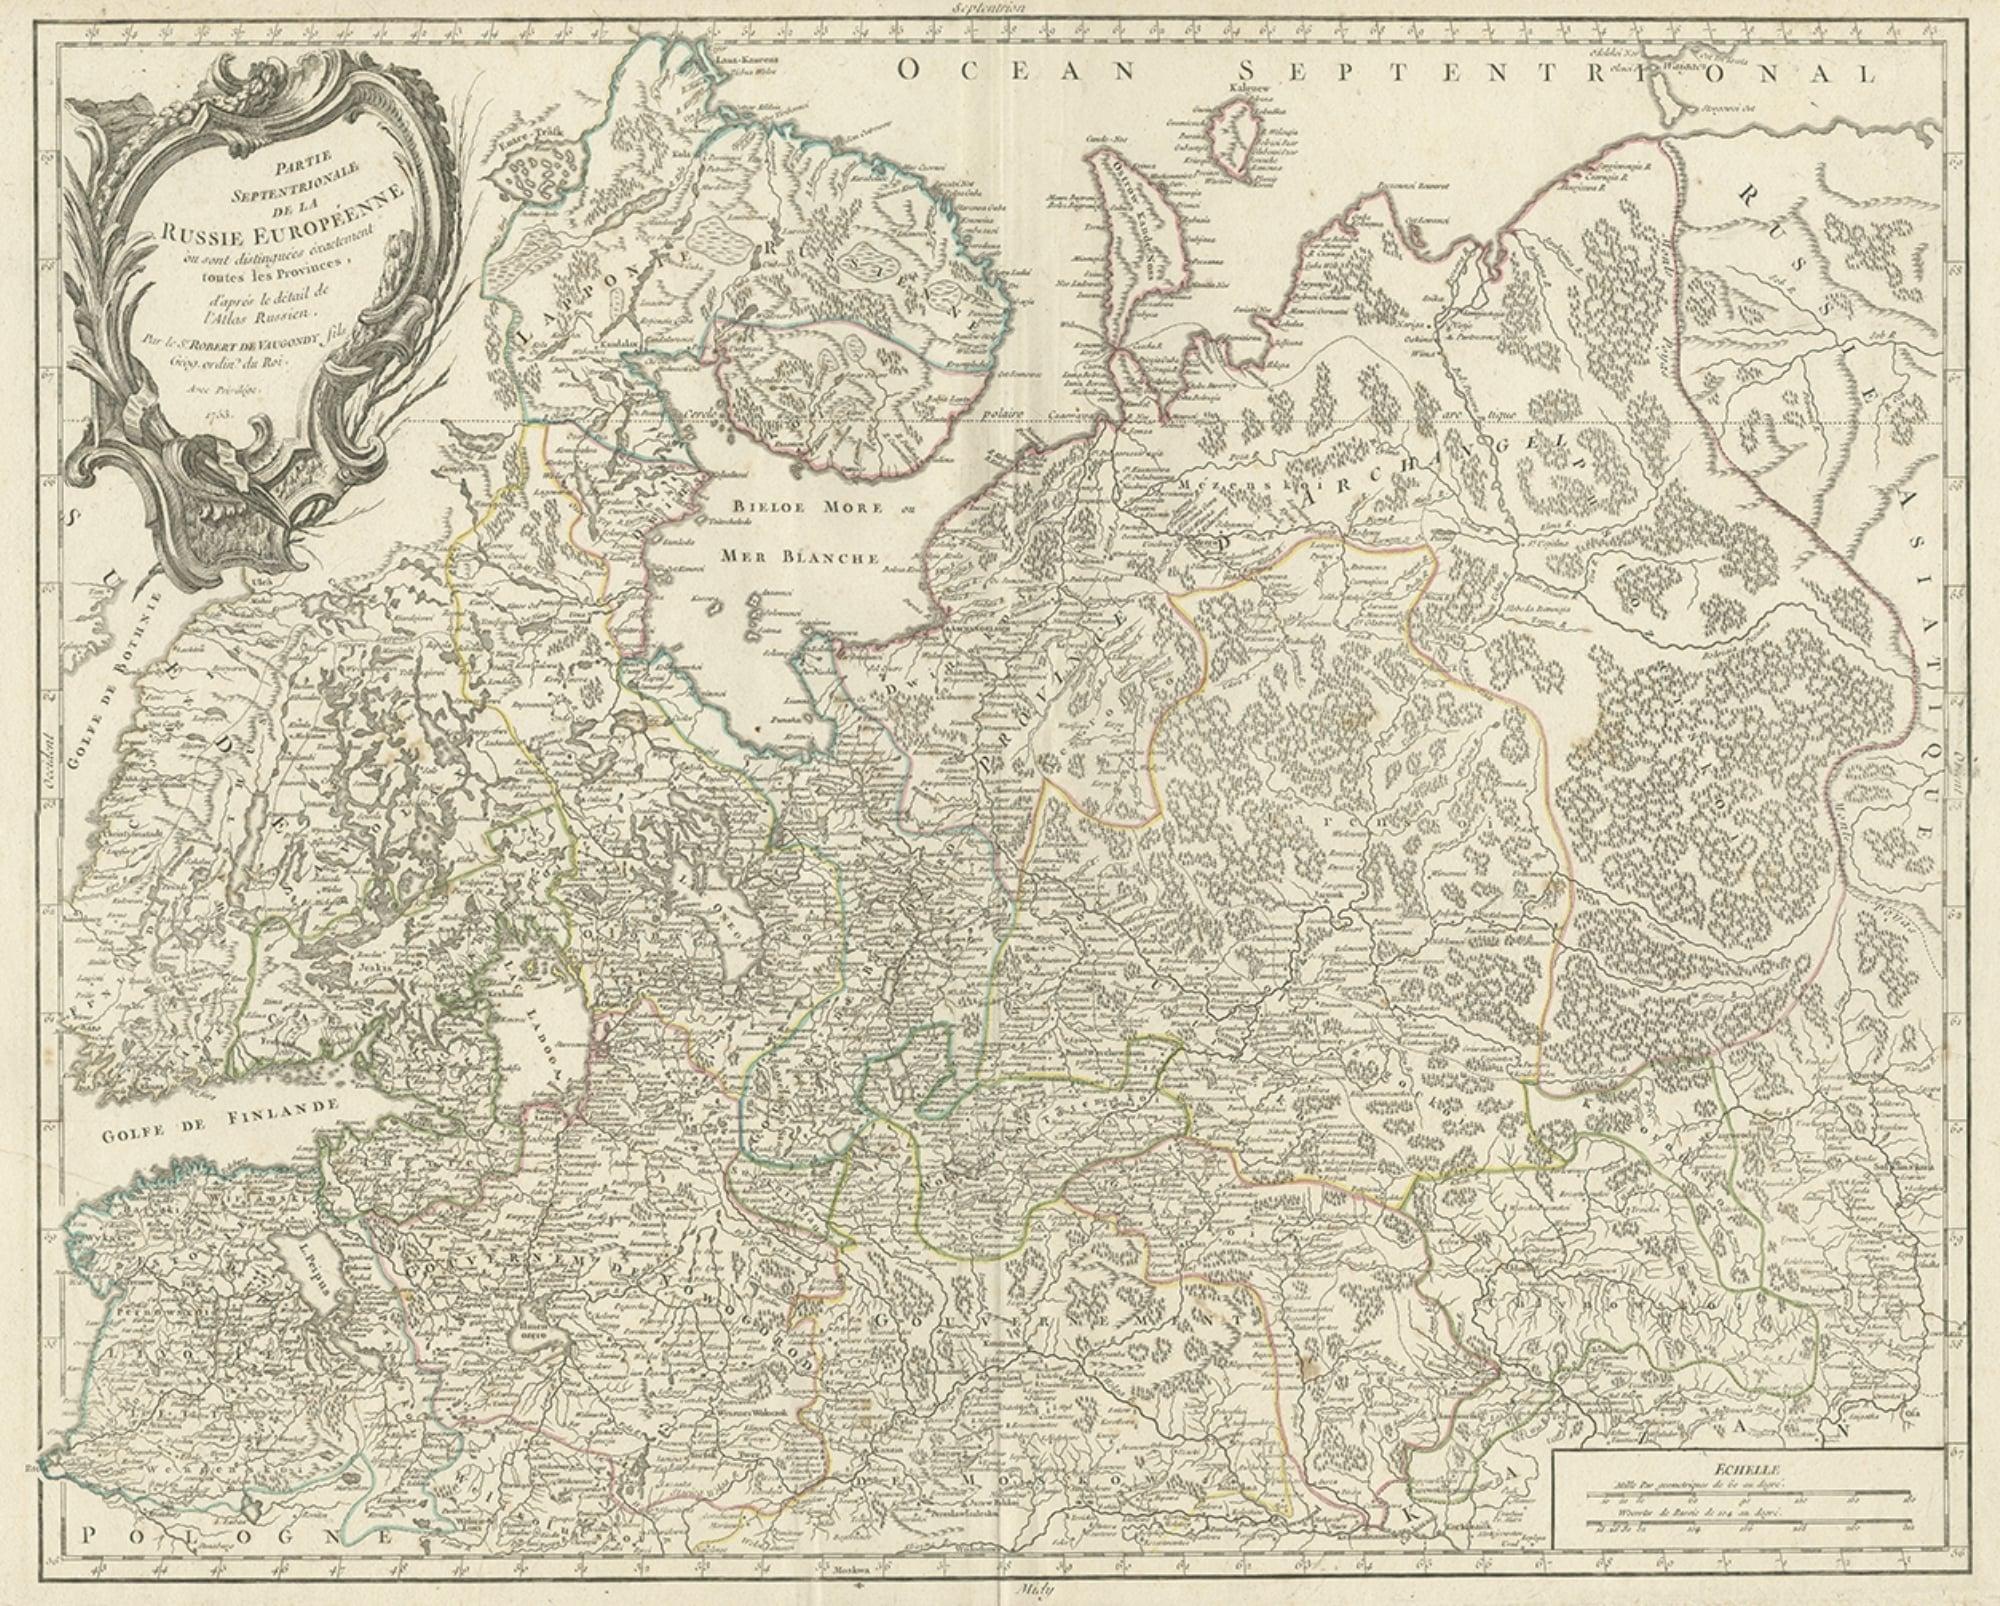 Antique map titled 'Partie septentrionale de la Russie Européenne'. 

Detailed map of the Northwestern part of Russia, from the Gulf of Finland and Poland, to the western part of Asian Russia.

Artists and Engravers: Gilles Robert de Vaugondy